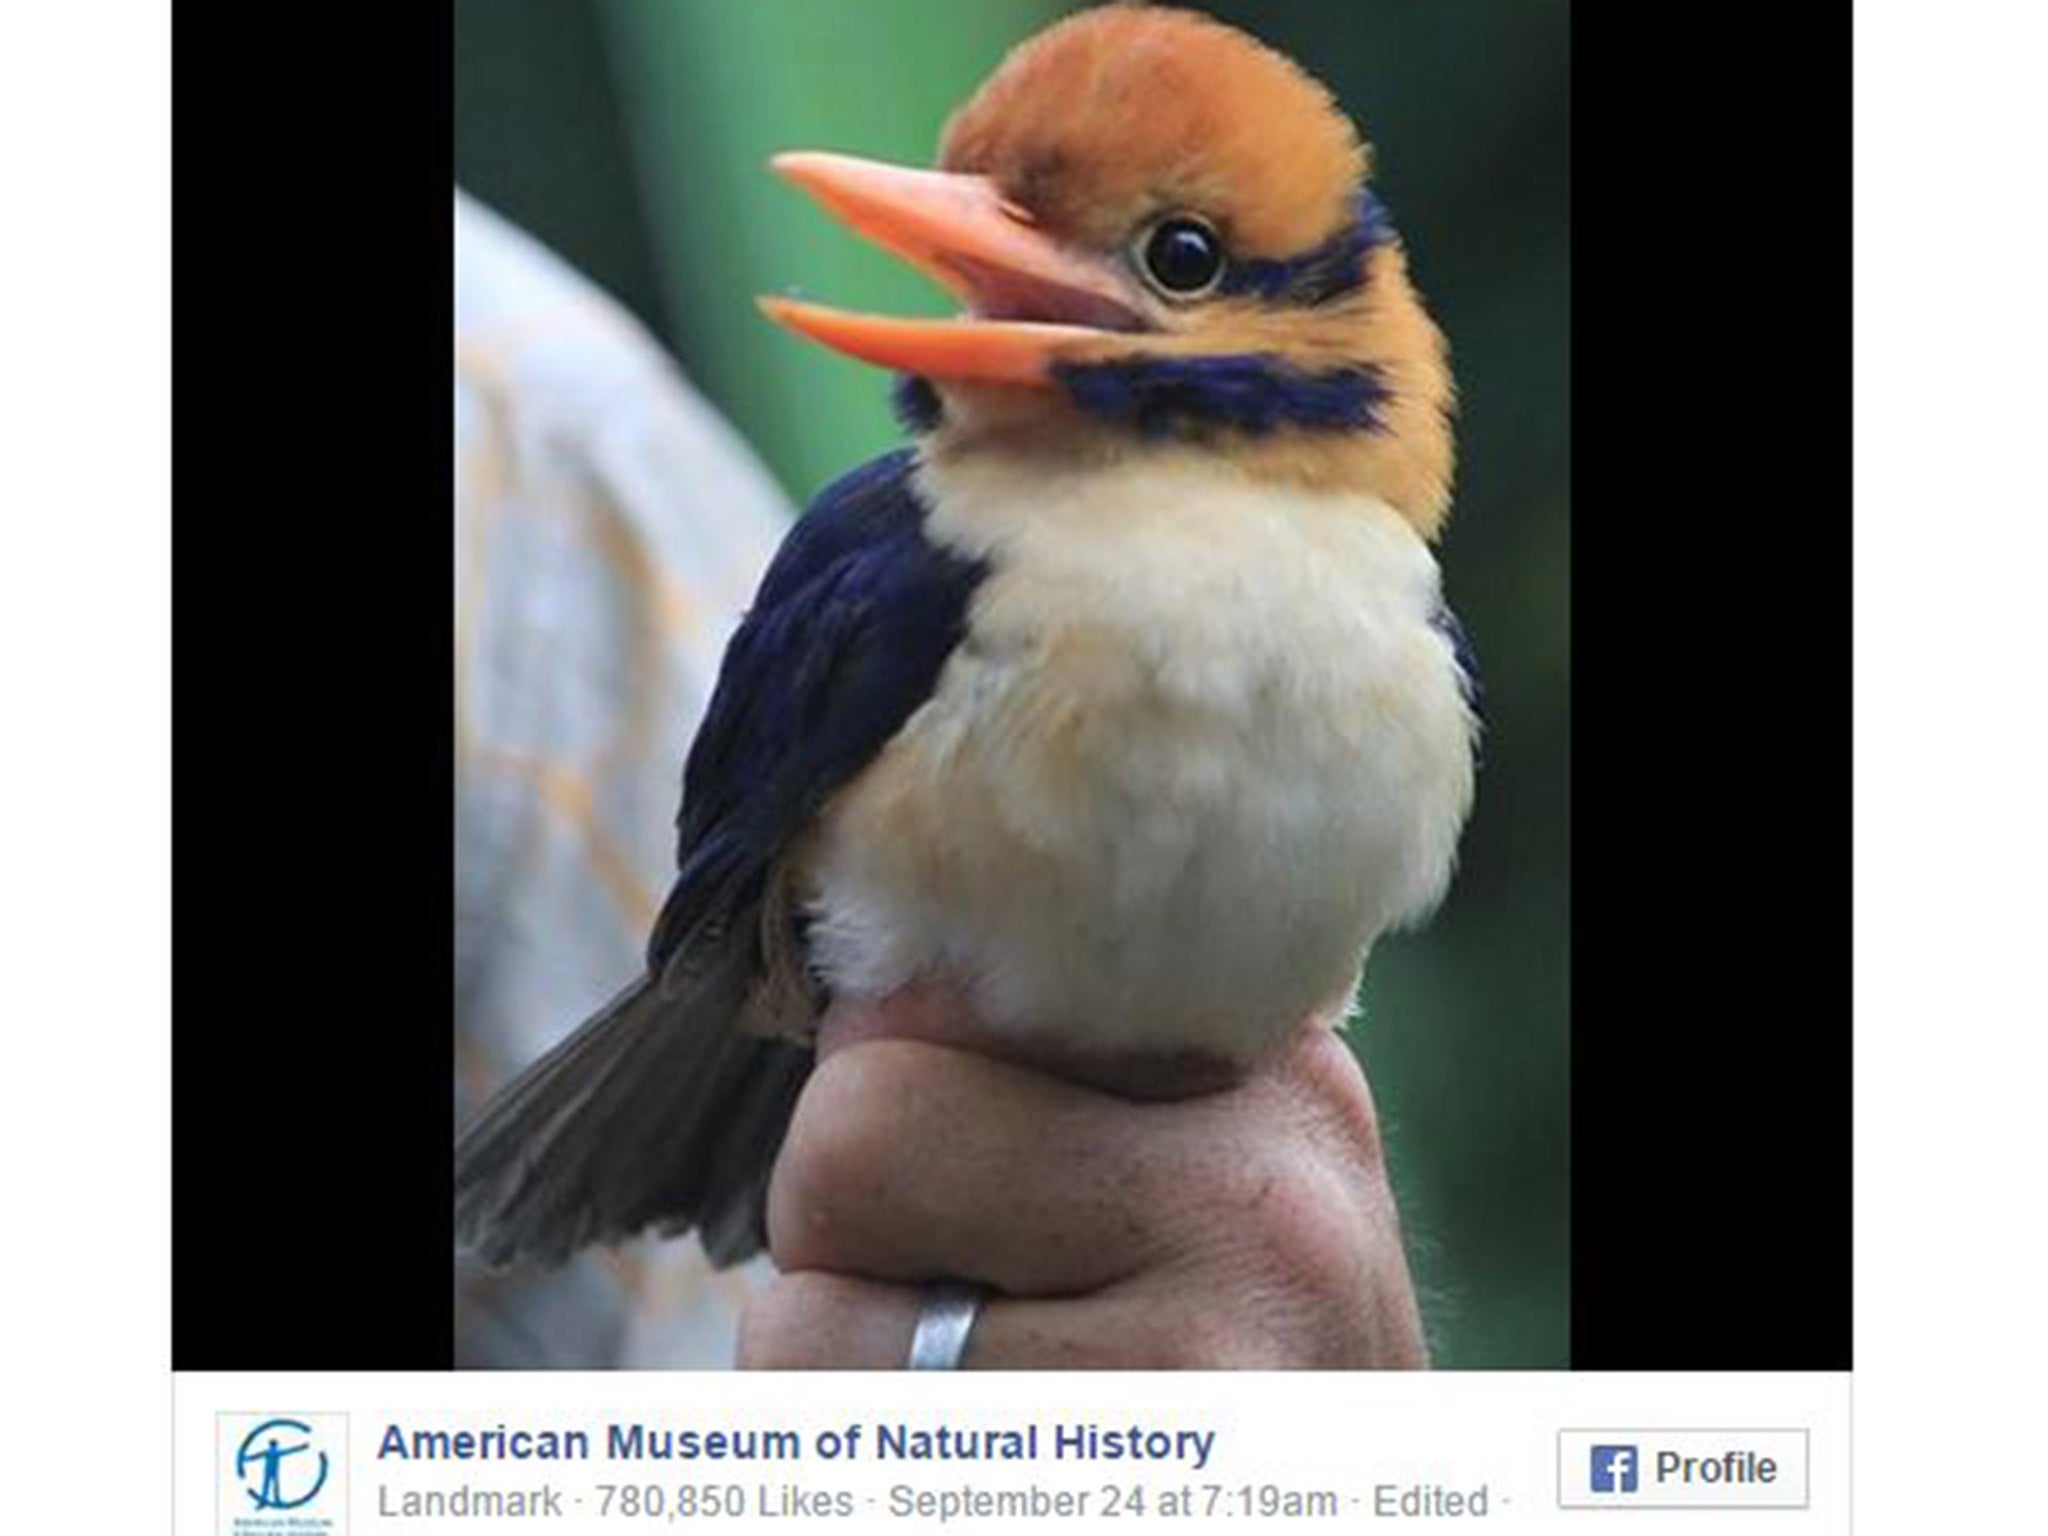 The American Museum of Natural History put this on its Facebook page, saying: "You are looking at the first-ever photos of a male moustached kingfisher! Chris Filardi is director of Pacific Programs at the Museum’s Center for Biodiversity and Conservation. This month, he’s blogging from the remote highlands of Guadalcanal in the Solomon Islands, where he is surveying endemic biodiversity and working with local partners to create a protected area."